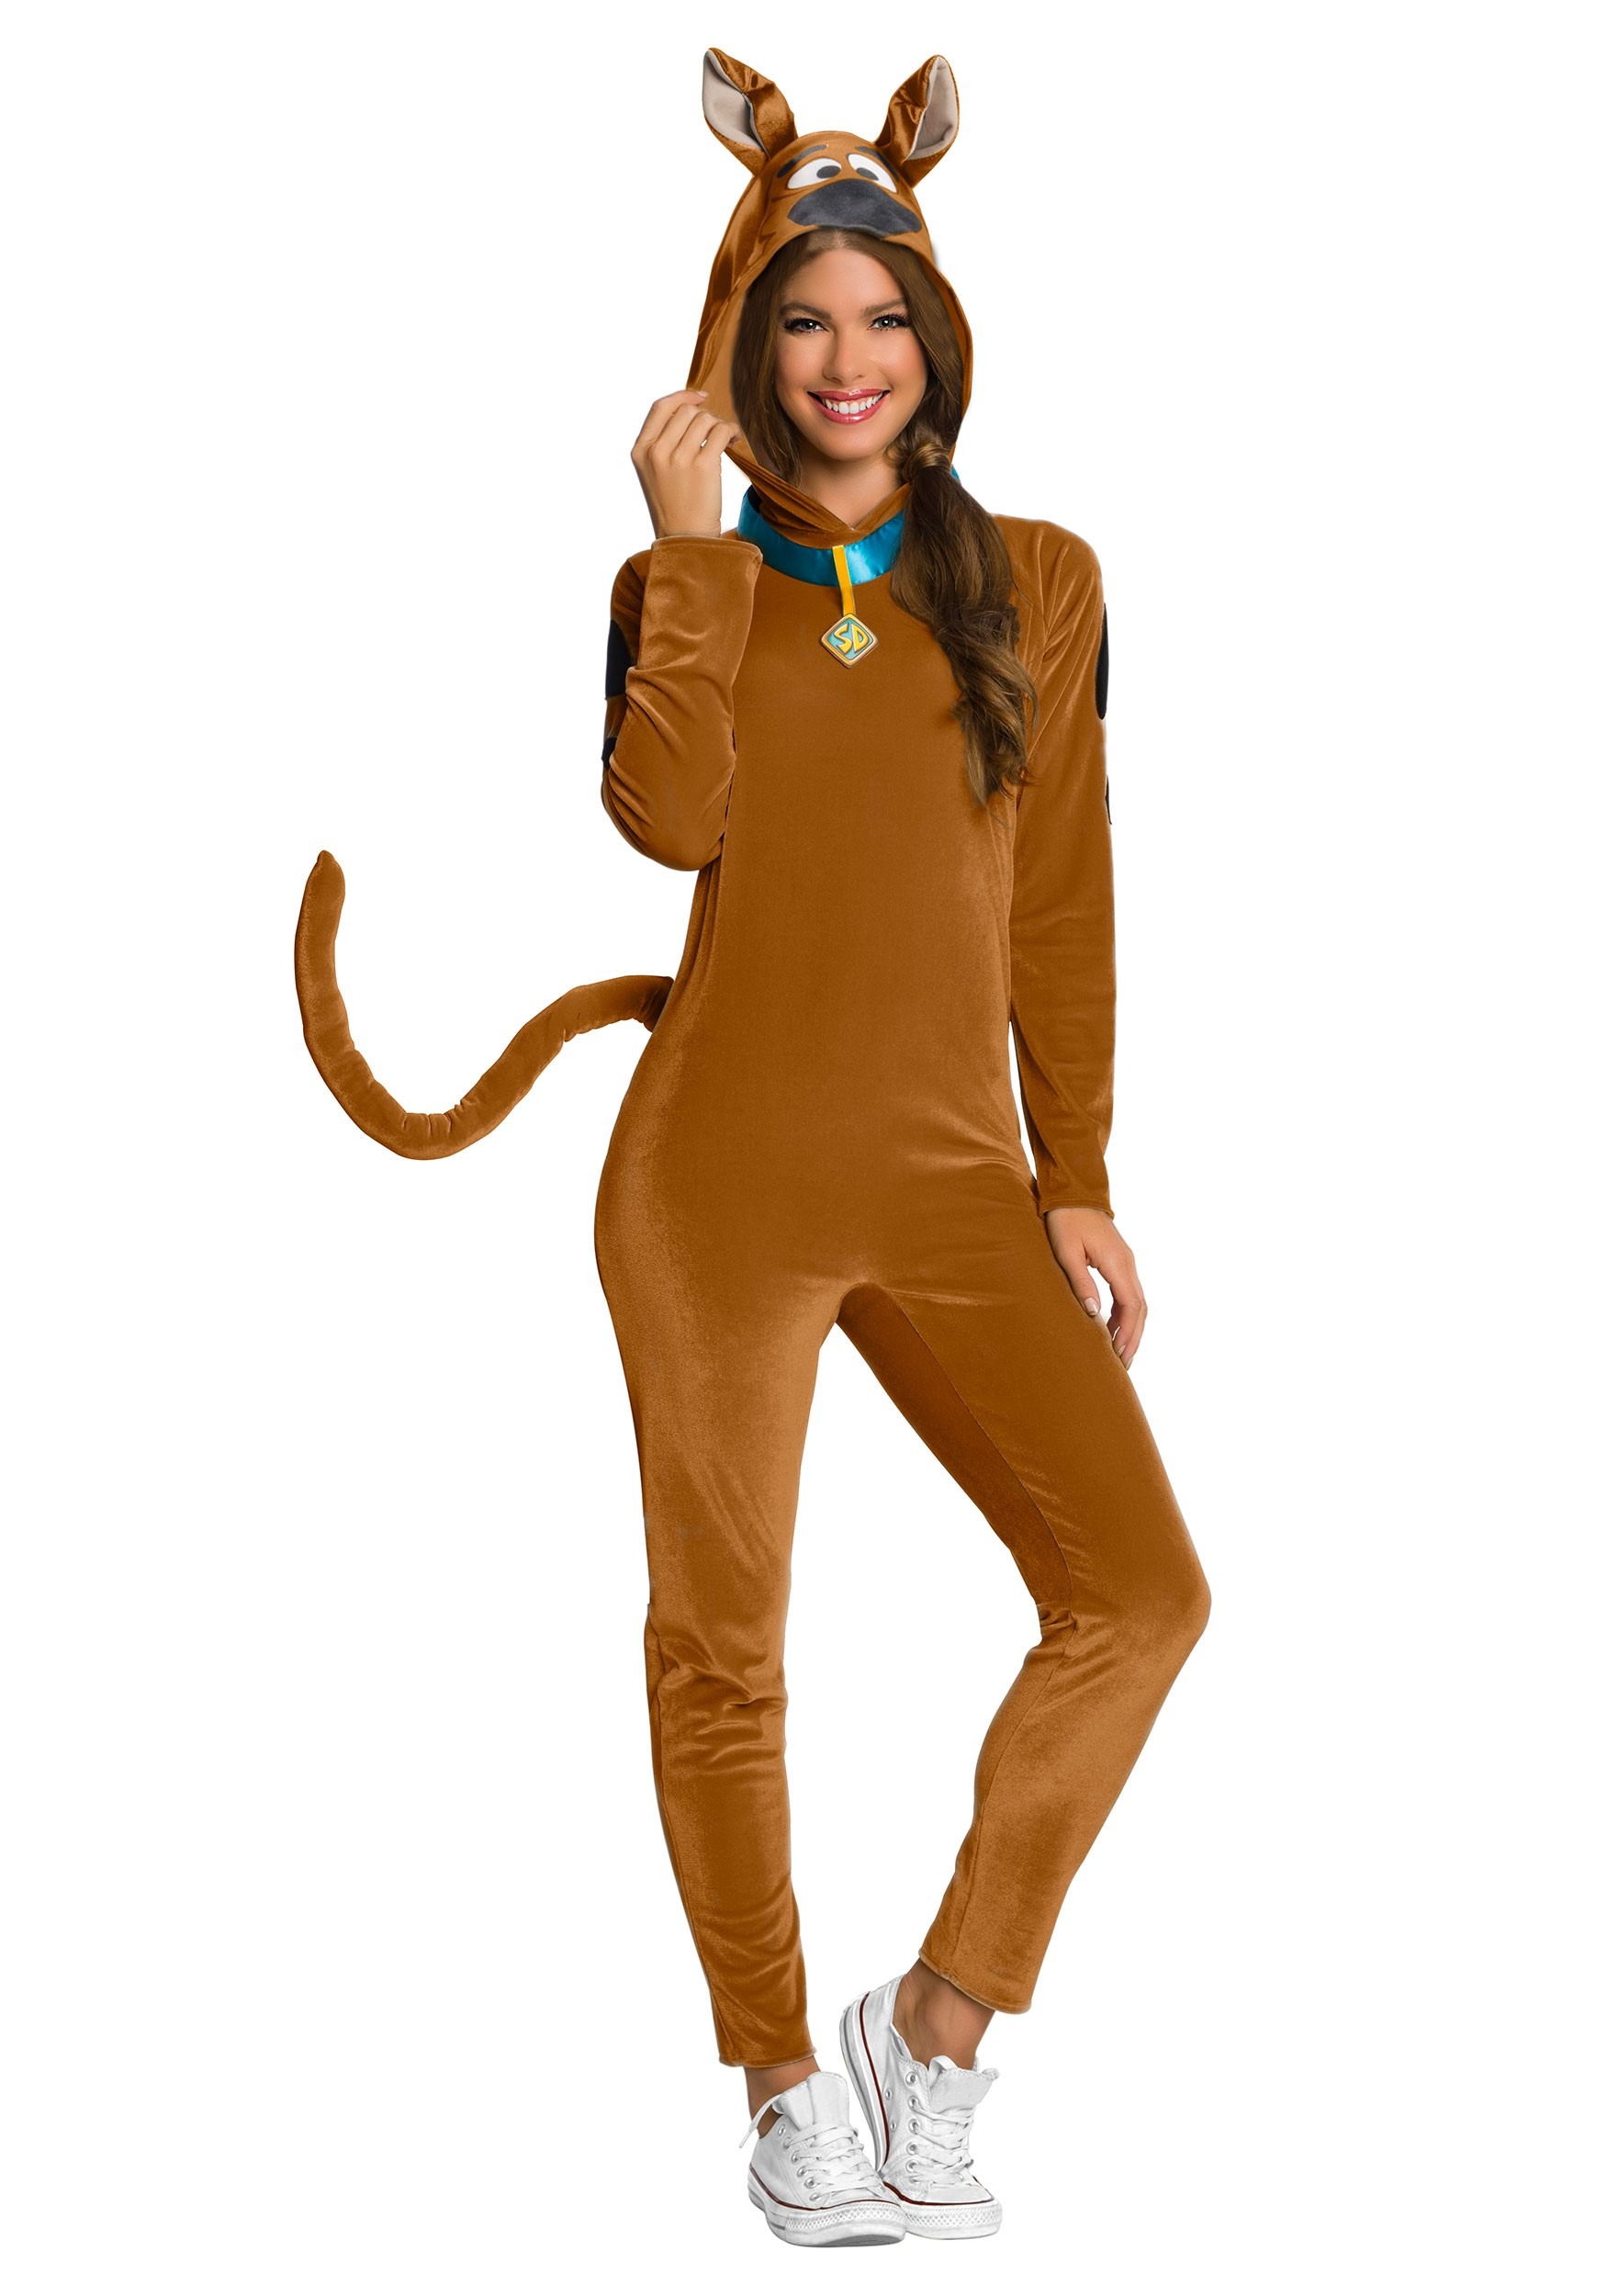 Must Have Scooby Doo Women S Costume Jumpsuit W Collar And Tail From Rubies Costume Co Inc